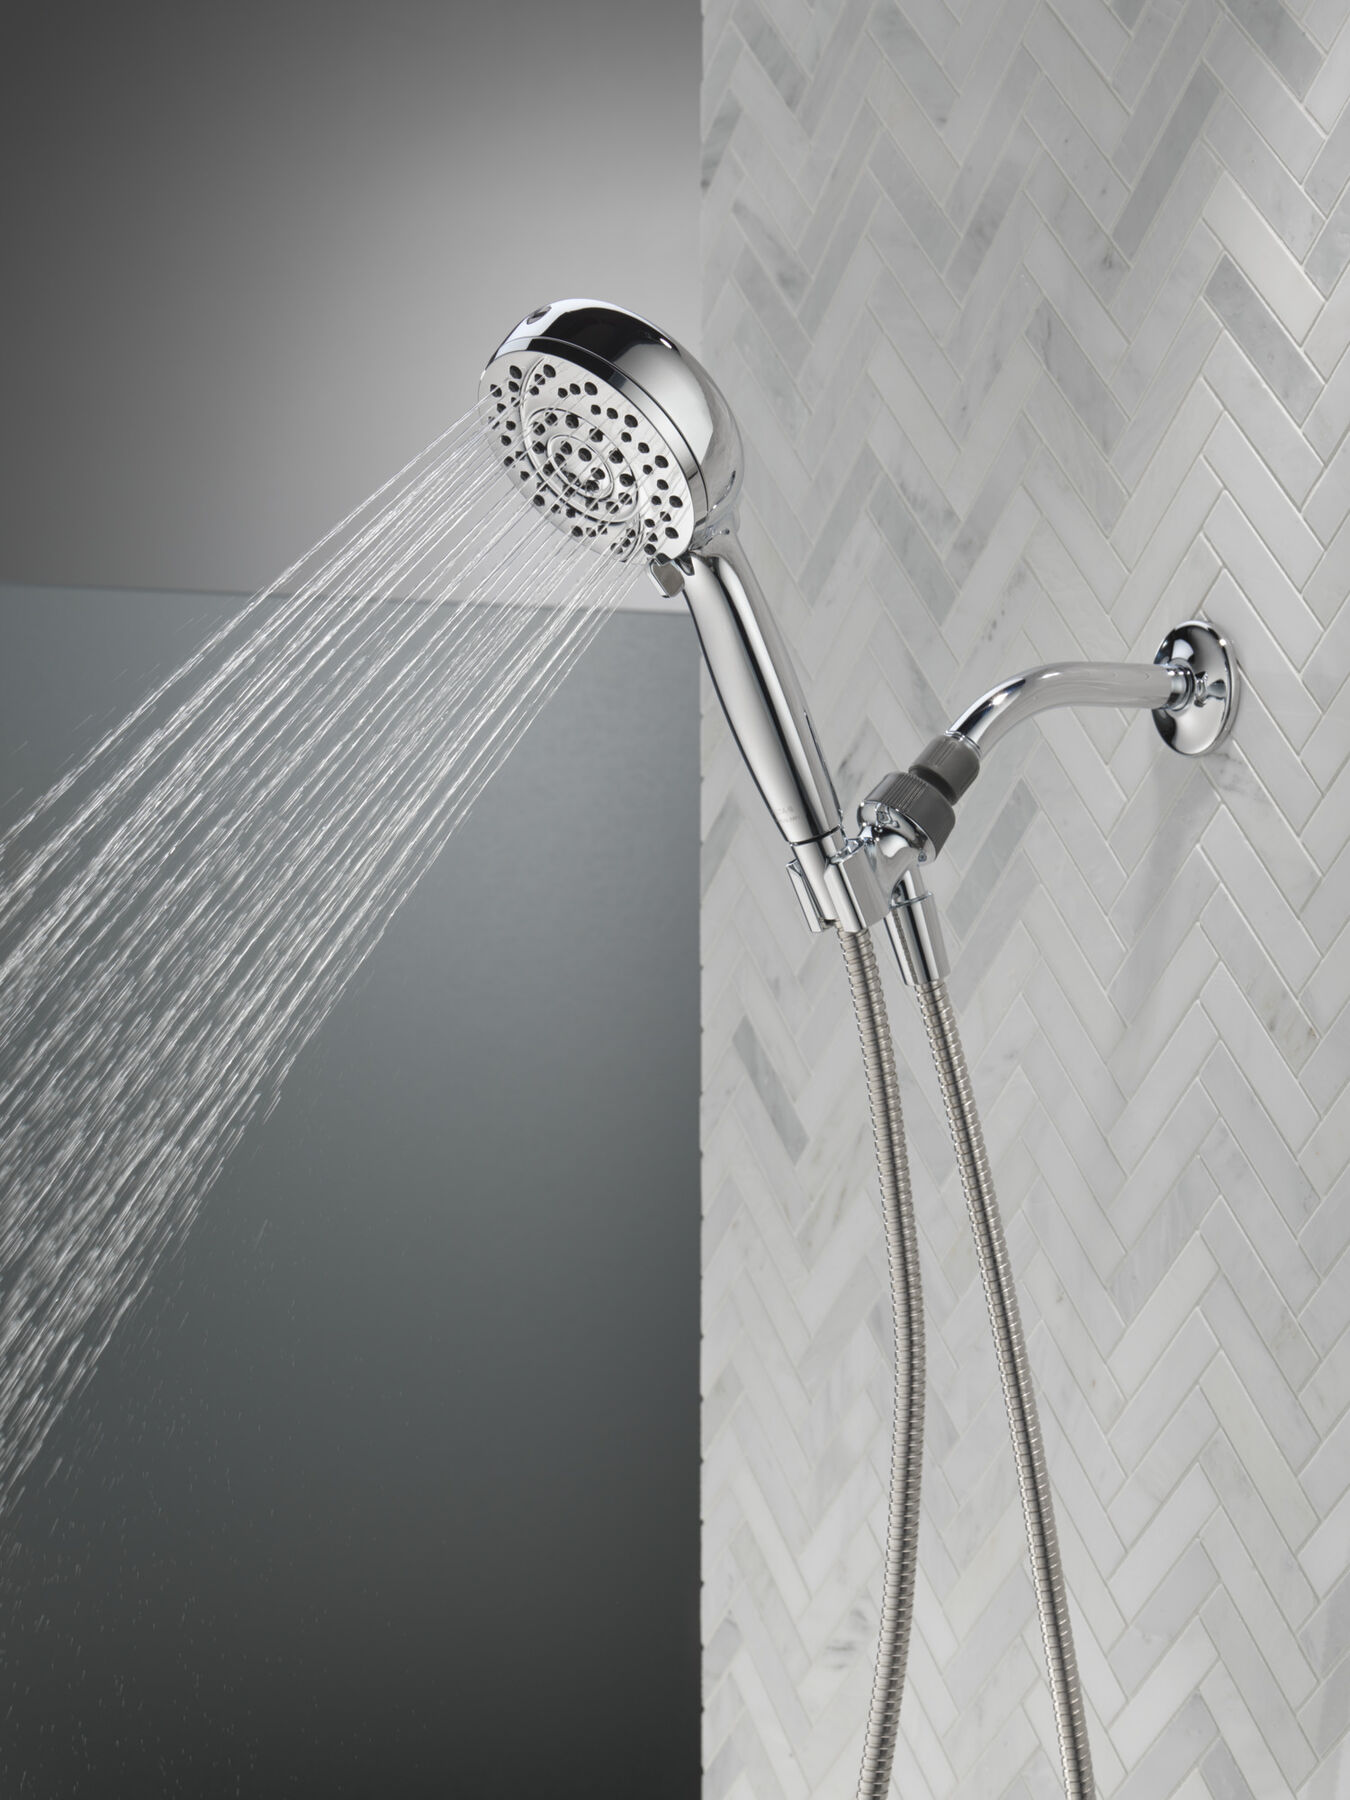 The Shower Power Pro Is a Hassle-Free, Hydro-Powered Shower